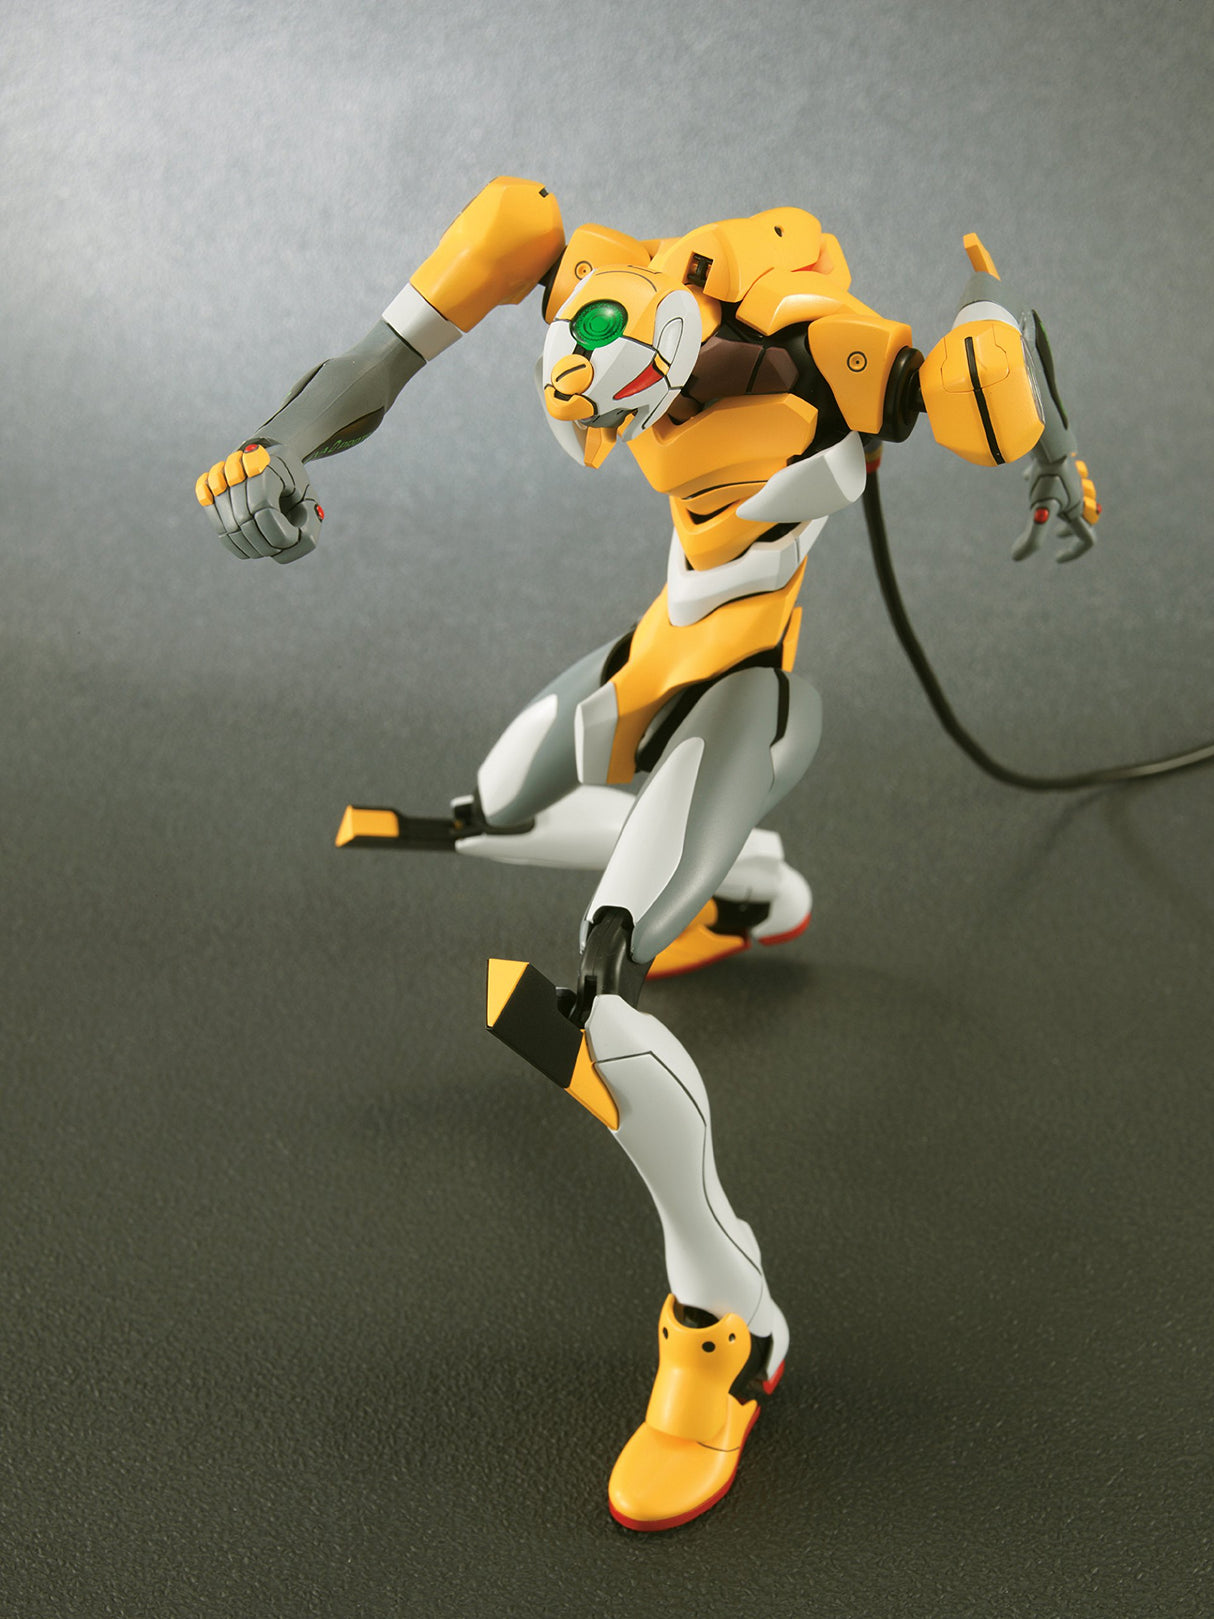 1.0 You are Not Alone Model Evangelion-00 Prototype Action Figure (150532)